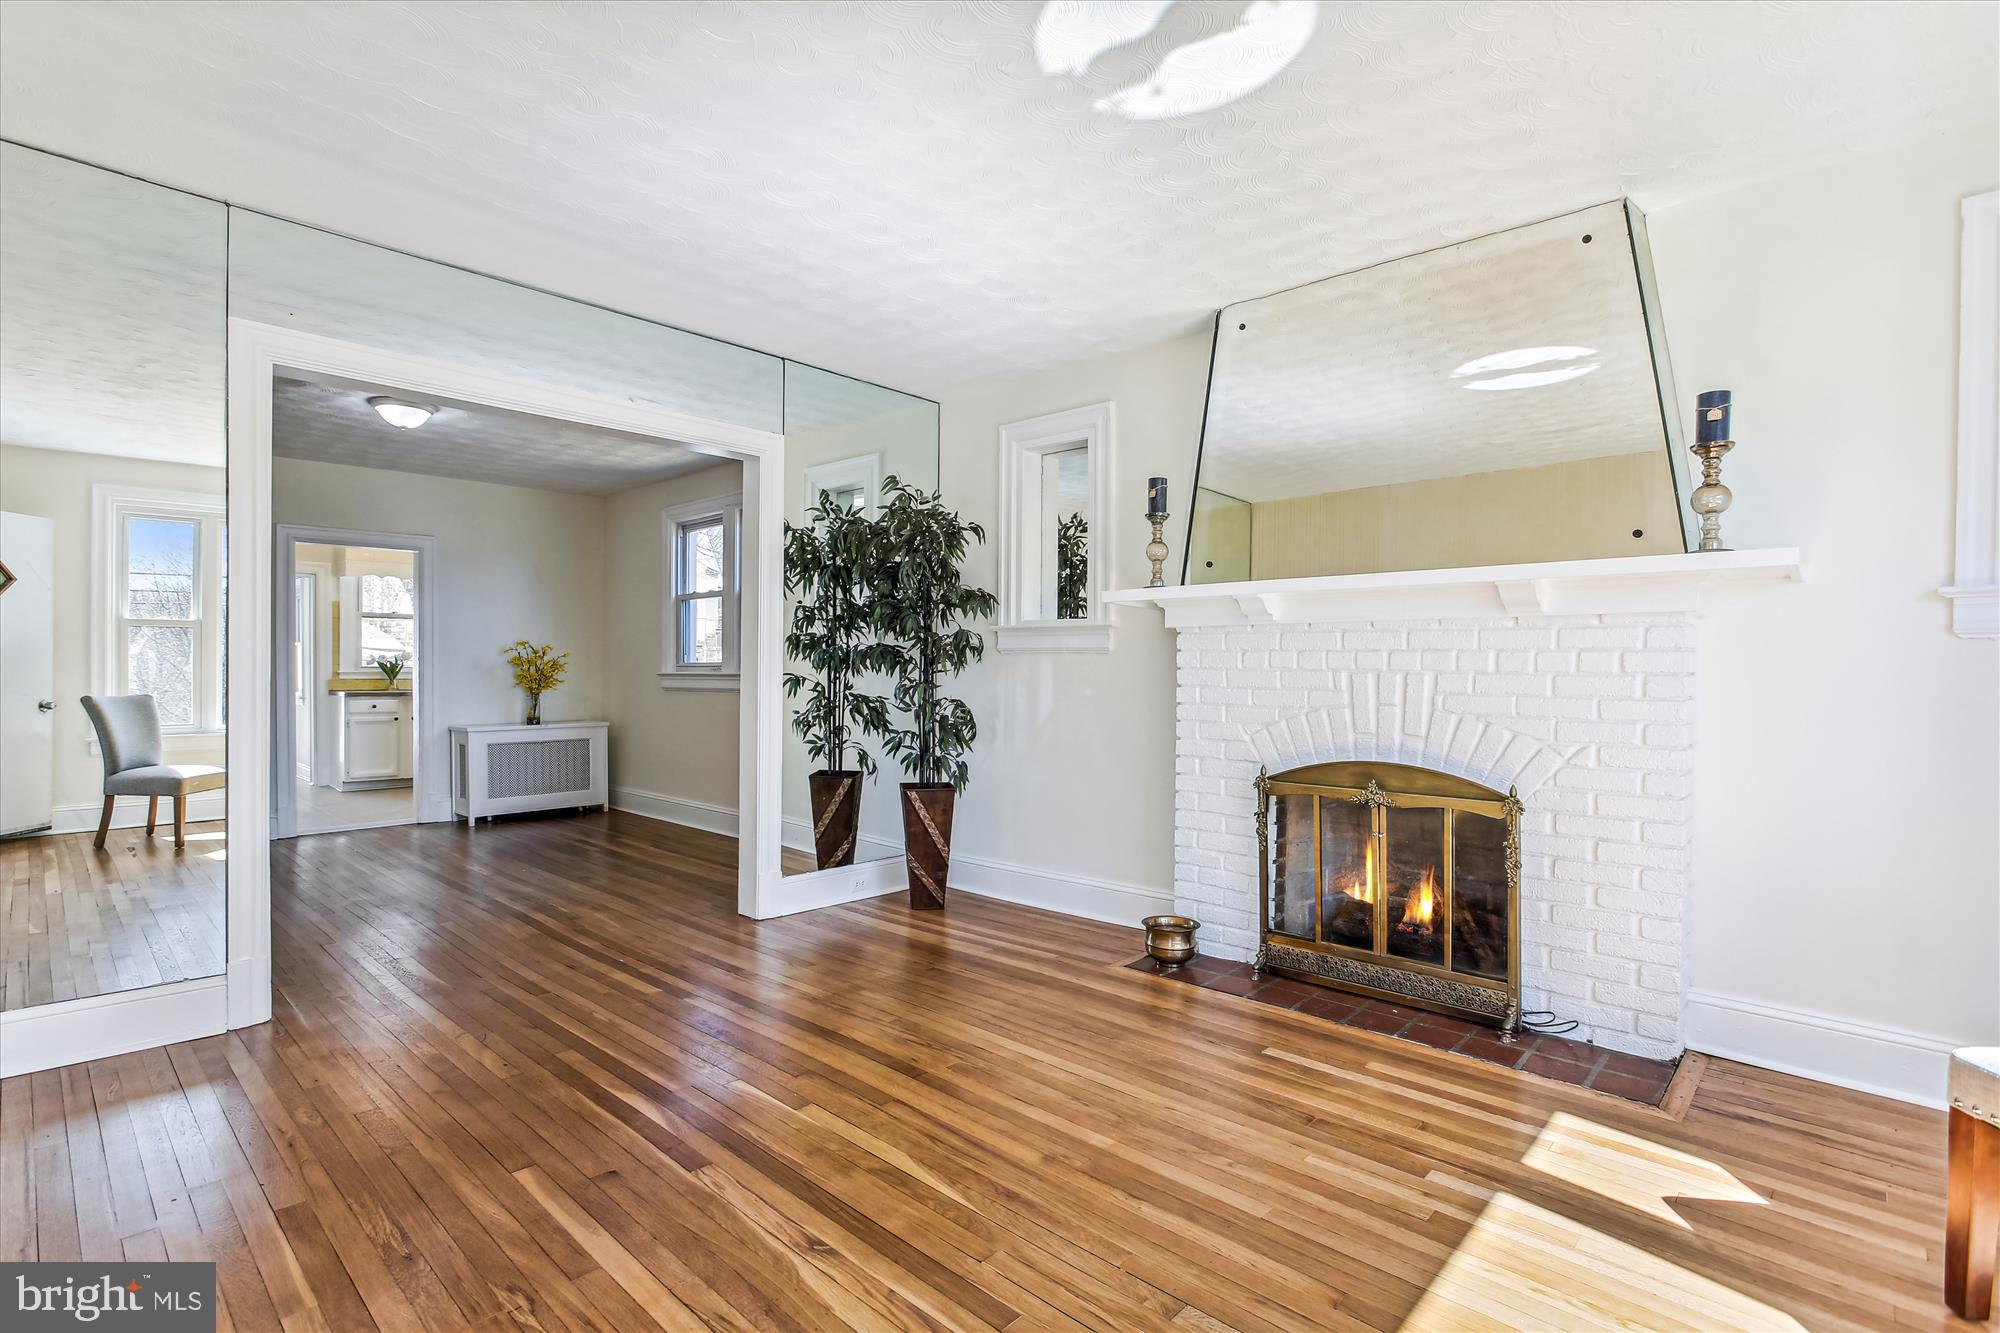 a view of empty room with fireplace and wooden floor